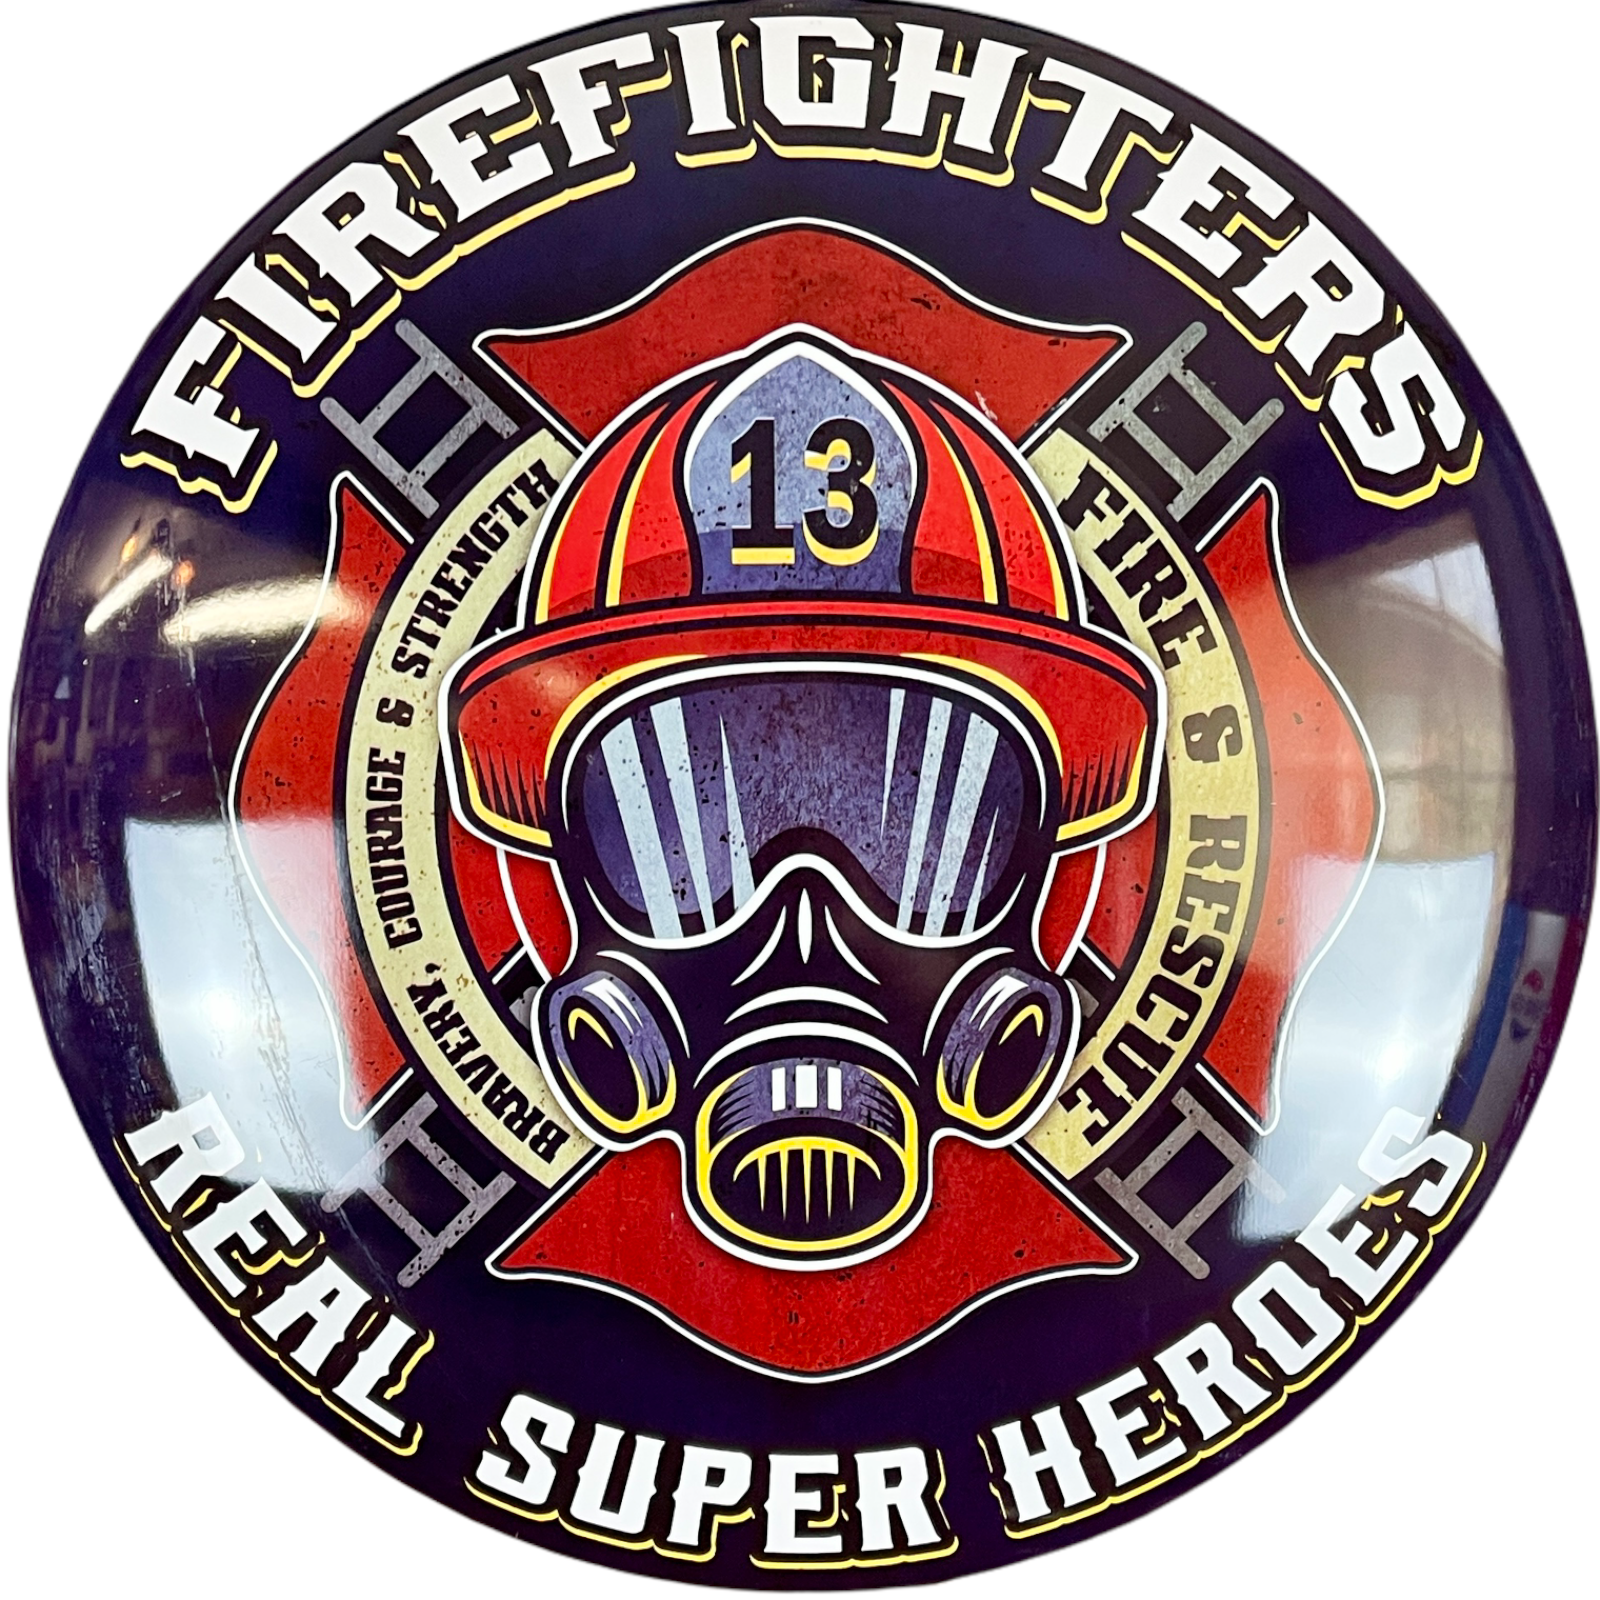 Firefighters Real Super Heroes Dome Shaped Metal Sign